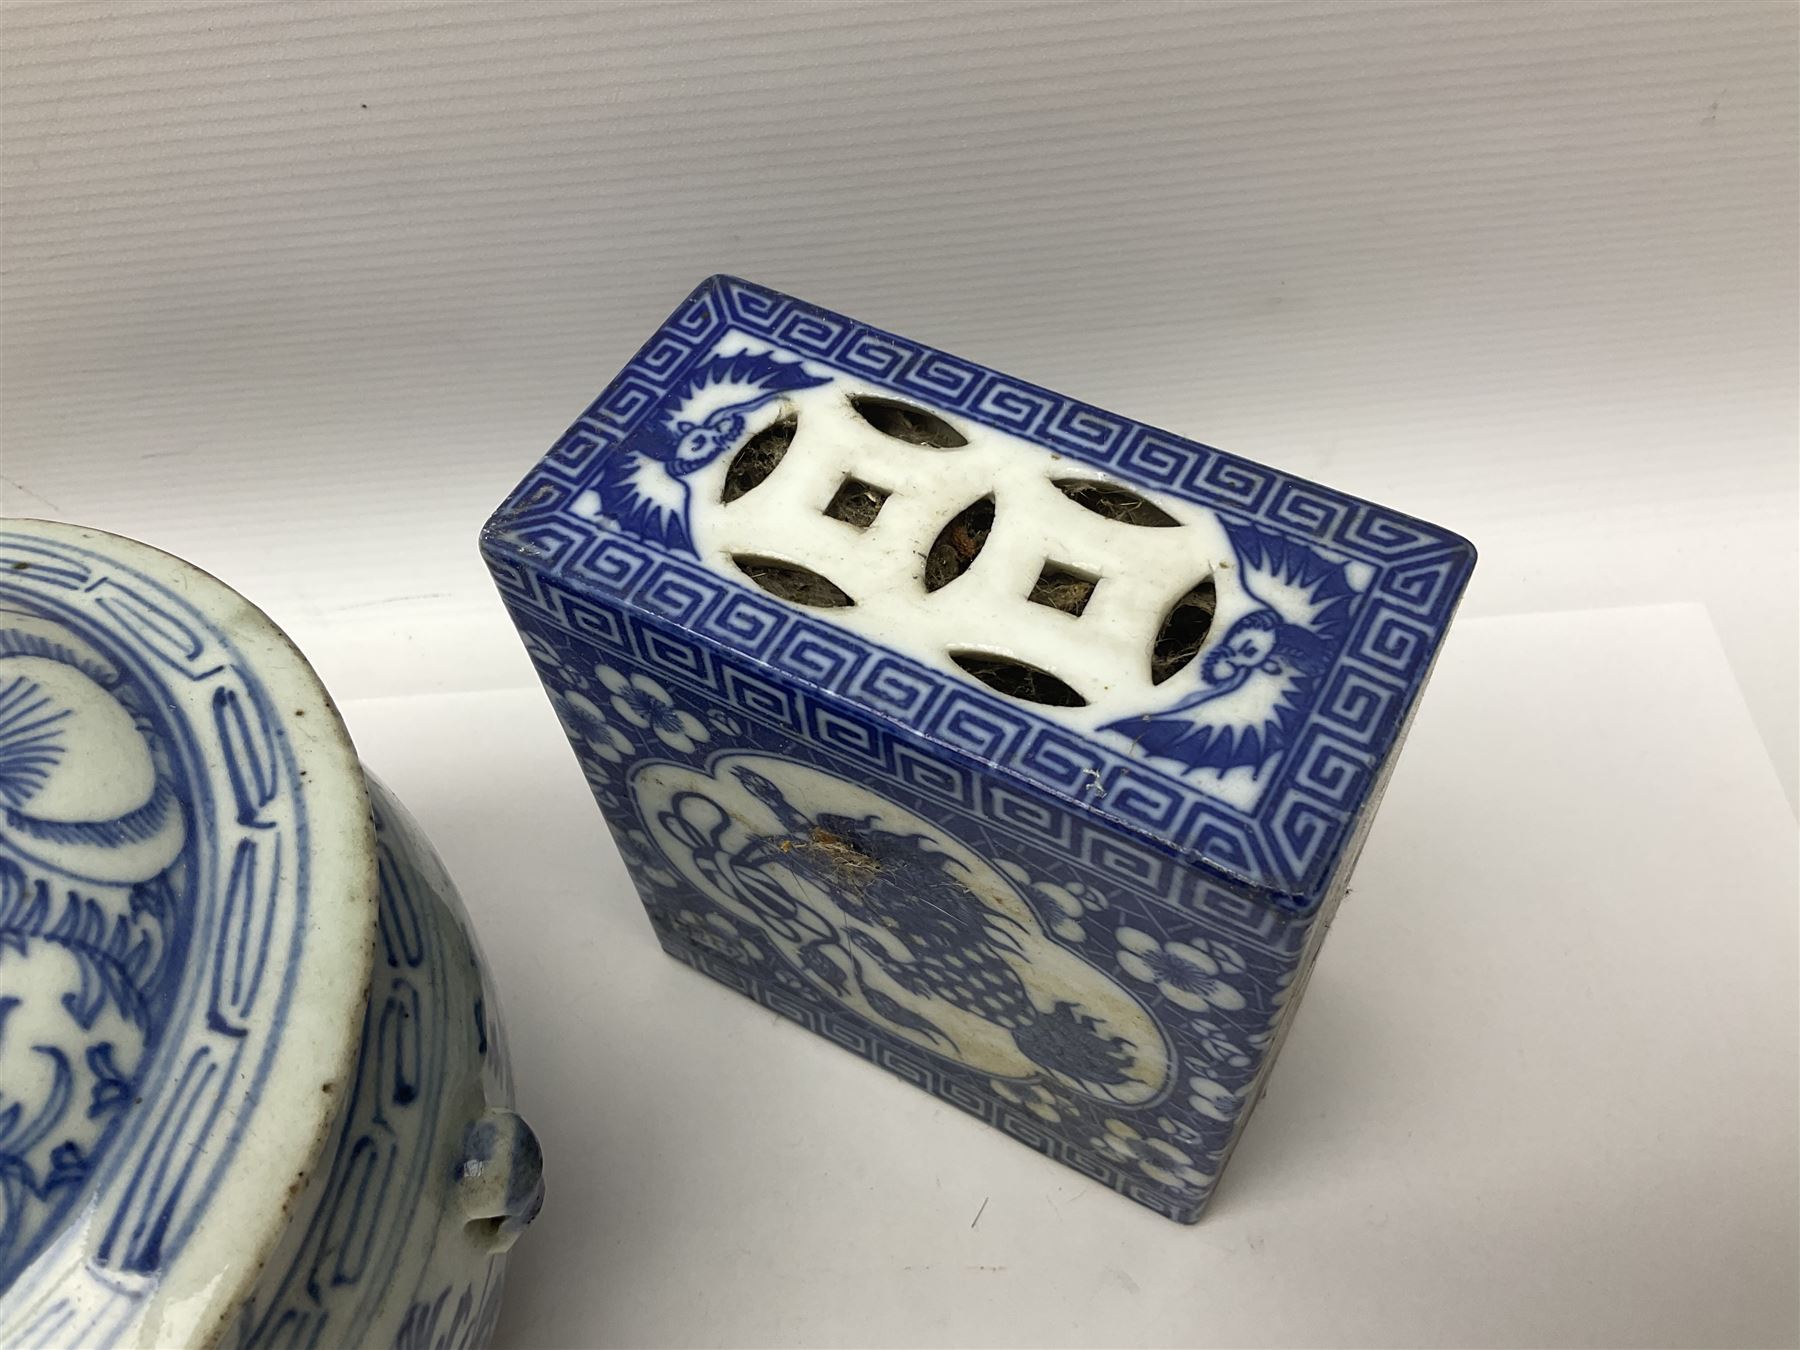 Two Chinese ceramic blue and white opium pillows with pierced ends - Image 9 of 10